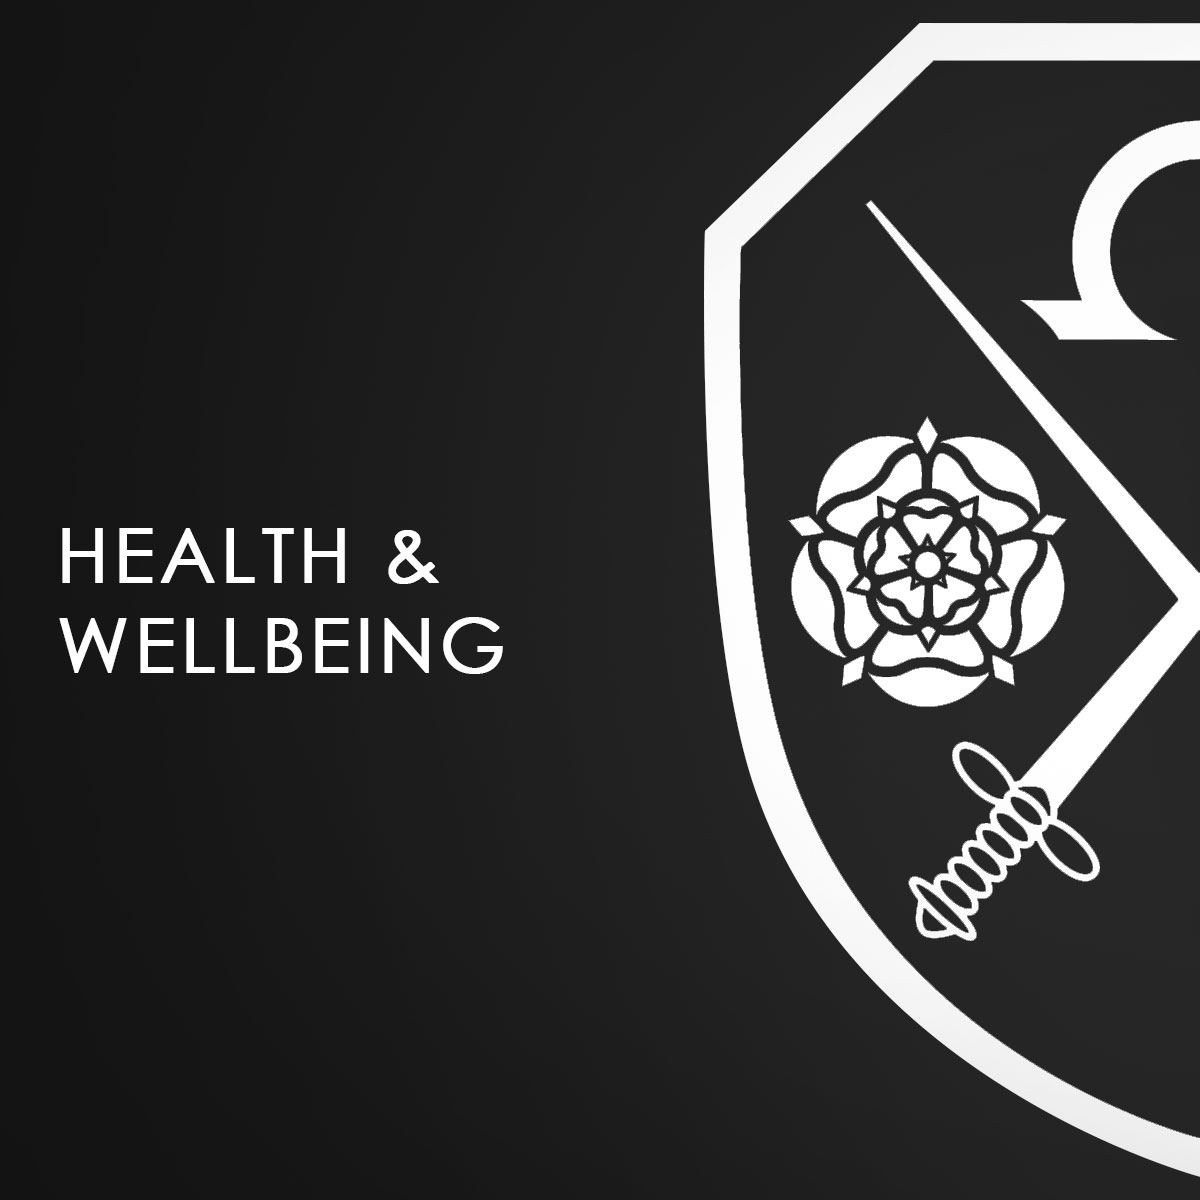 A black background with the East Barnet School logo which says Health and Wellbeing